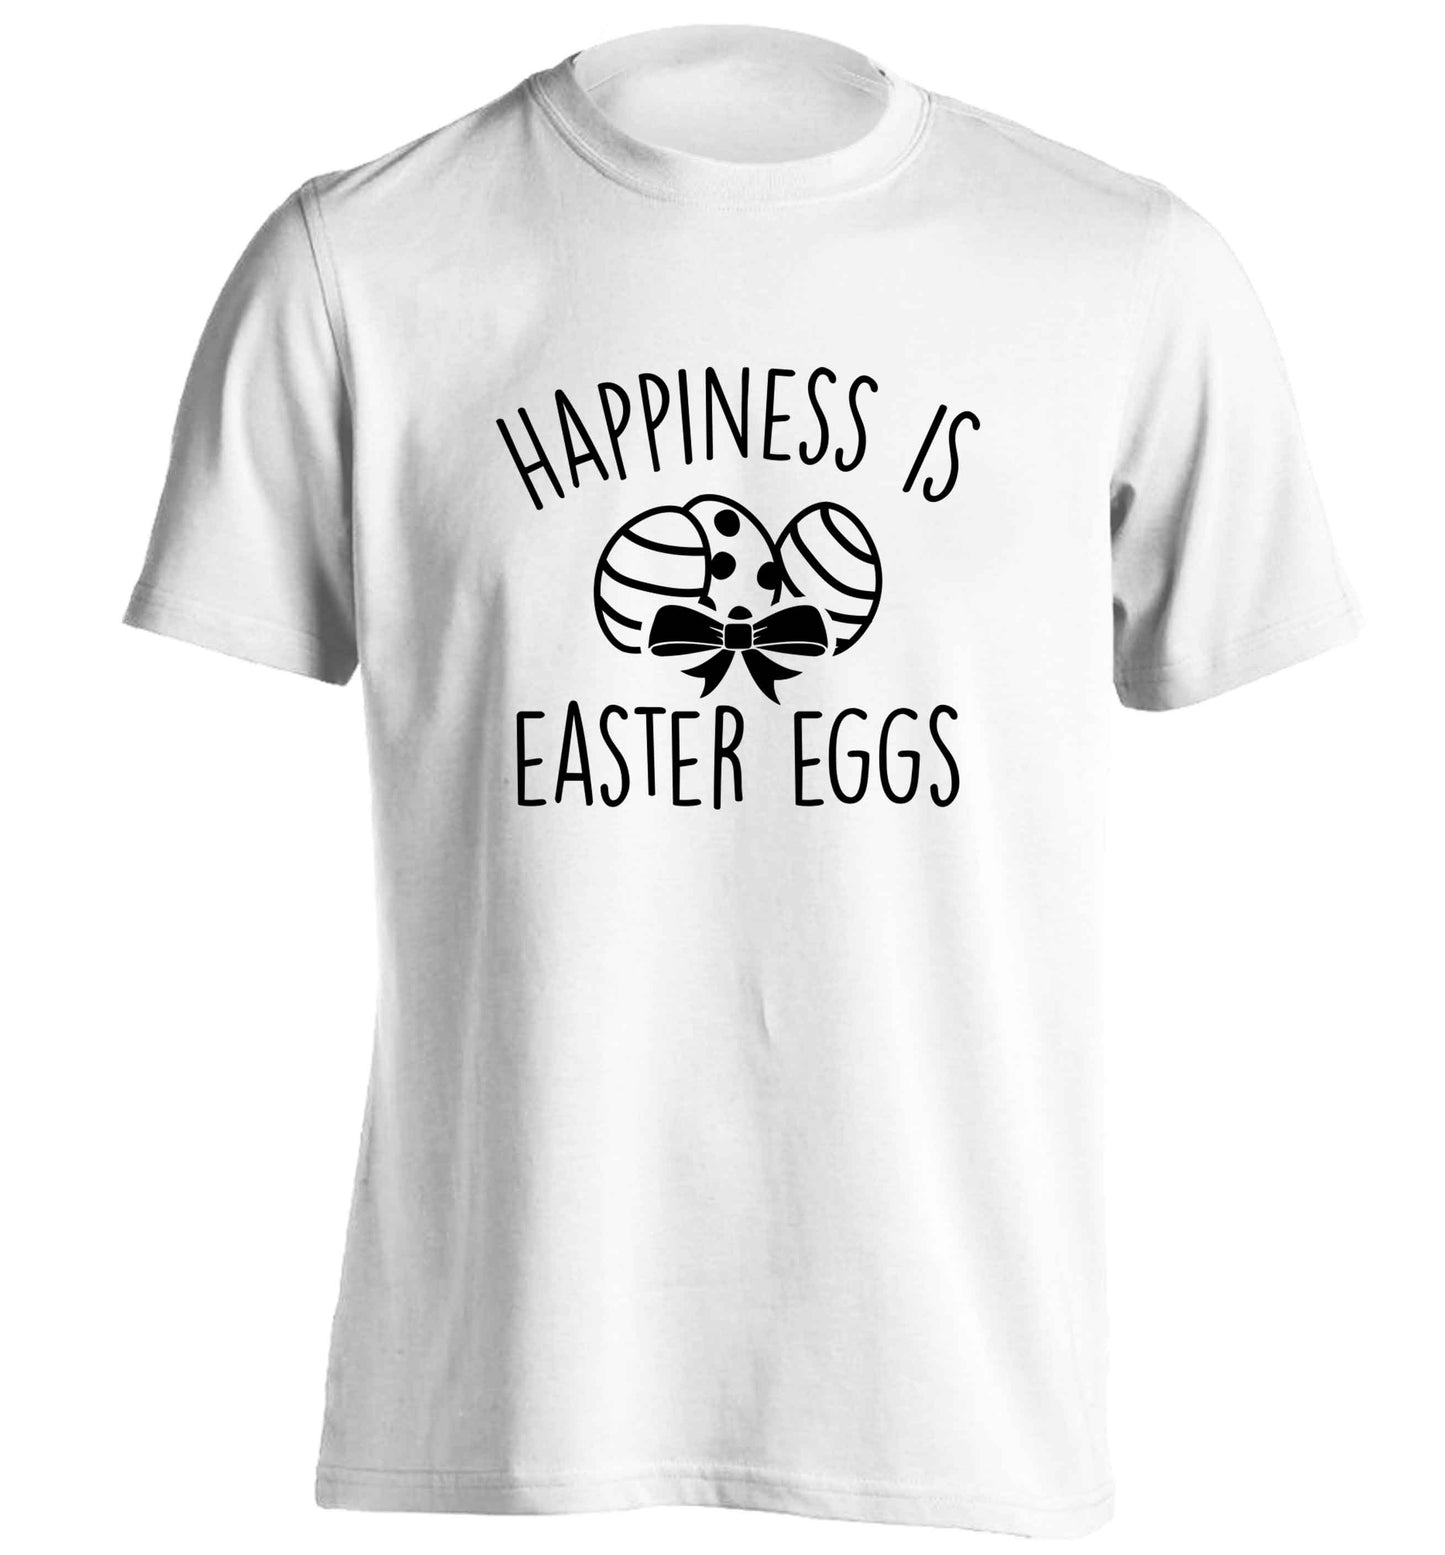 Happiness is Easter eggs adults unisex white Tshirt 2XL